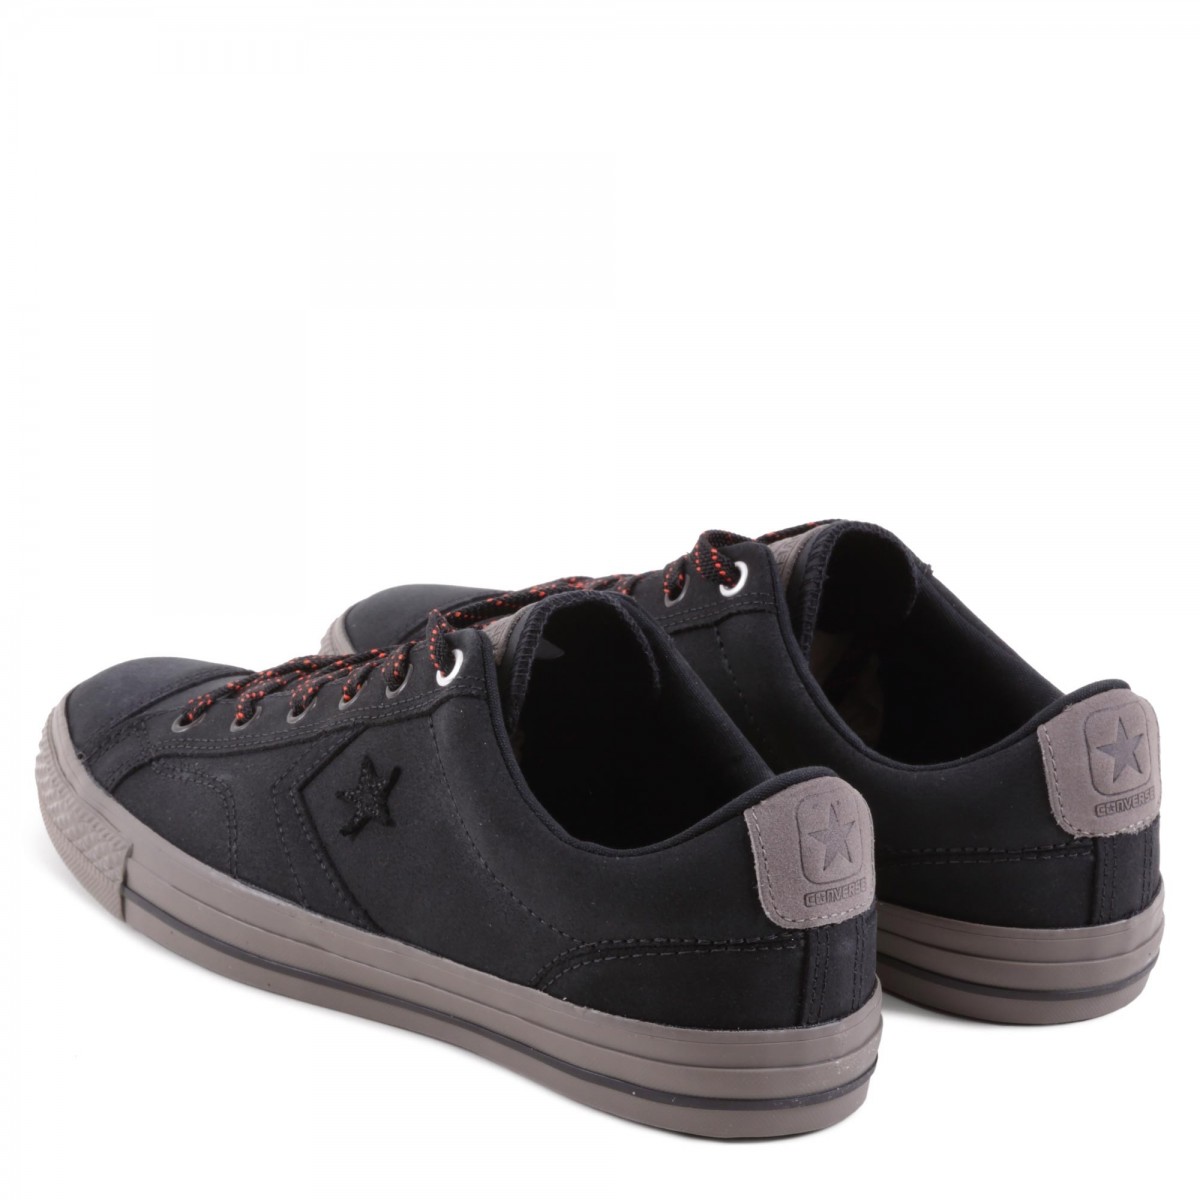 STAR PLAYER SUEDE OX 153741C